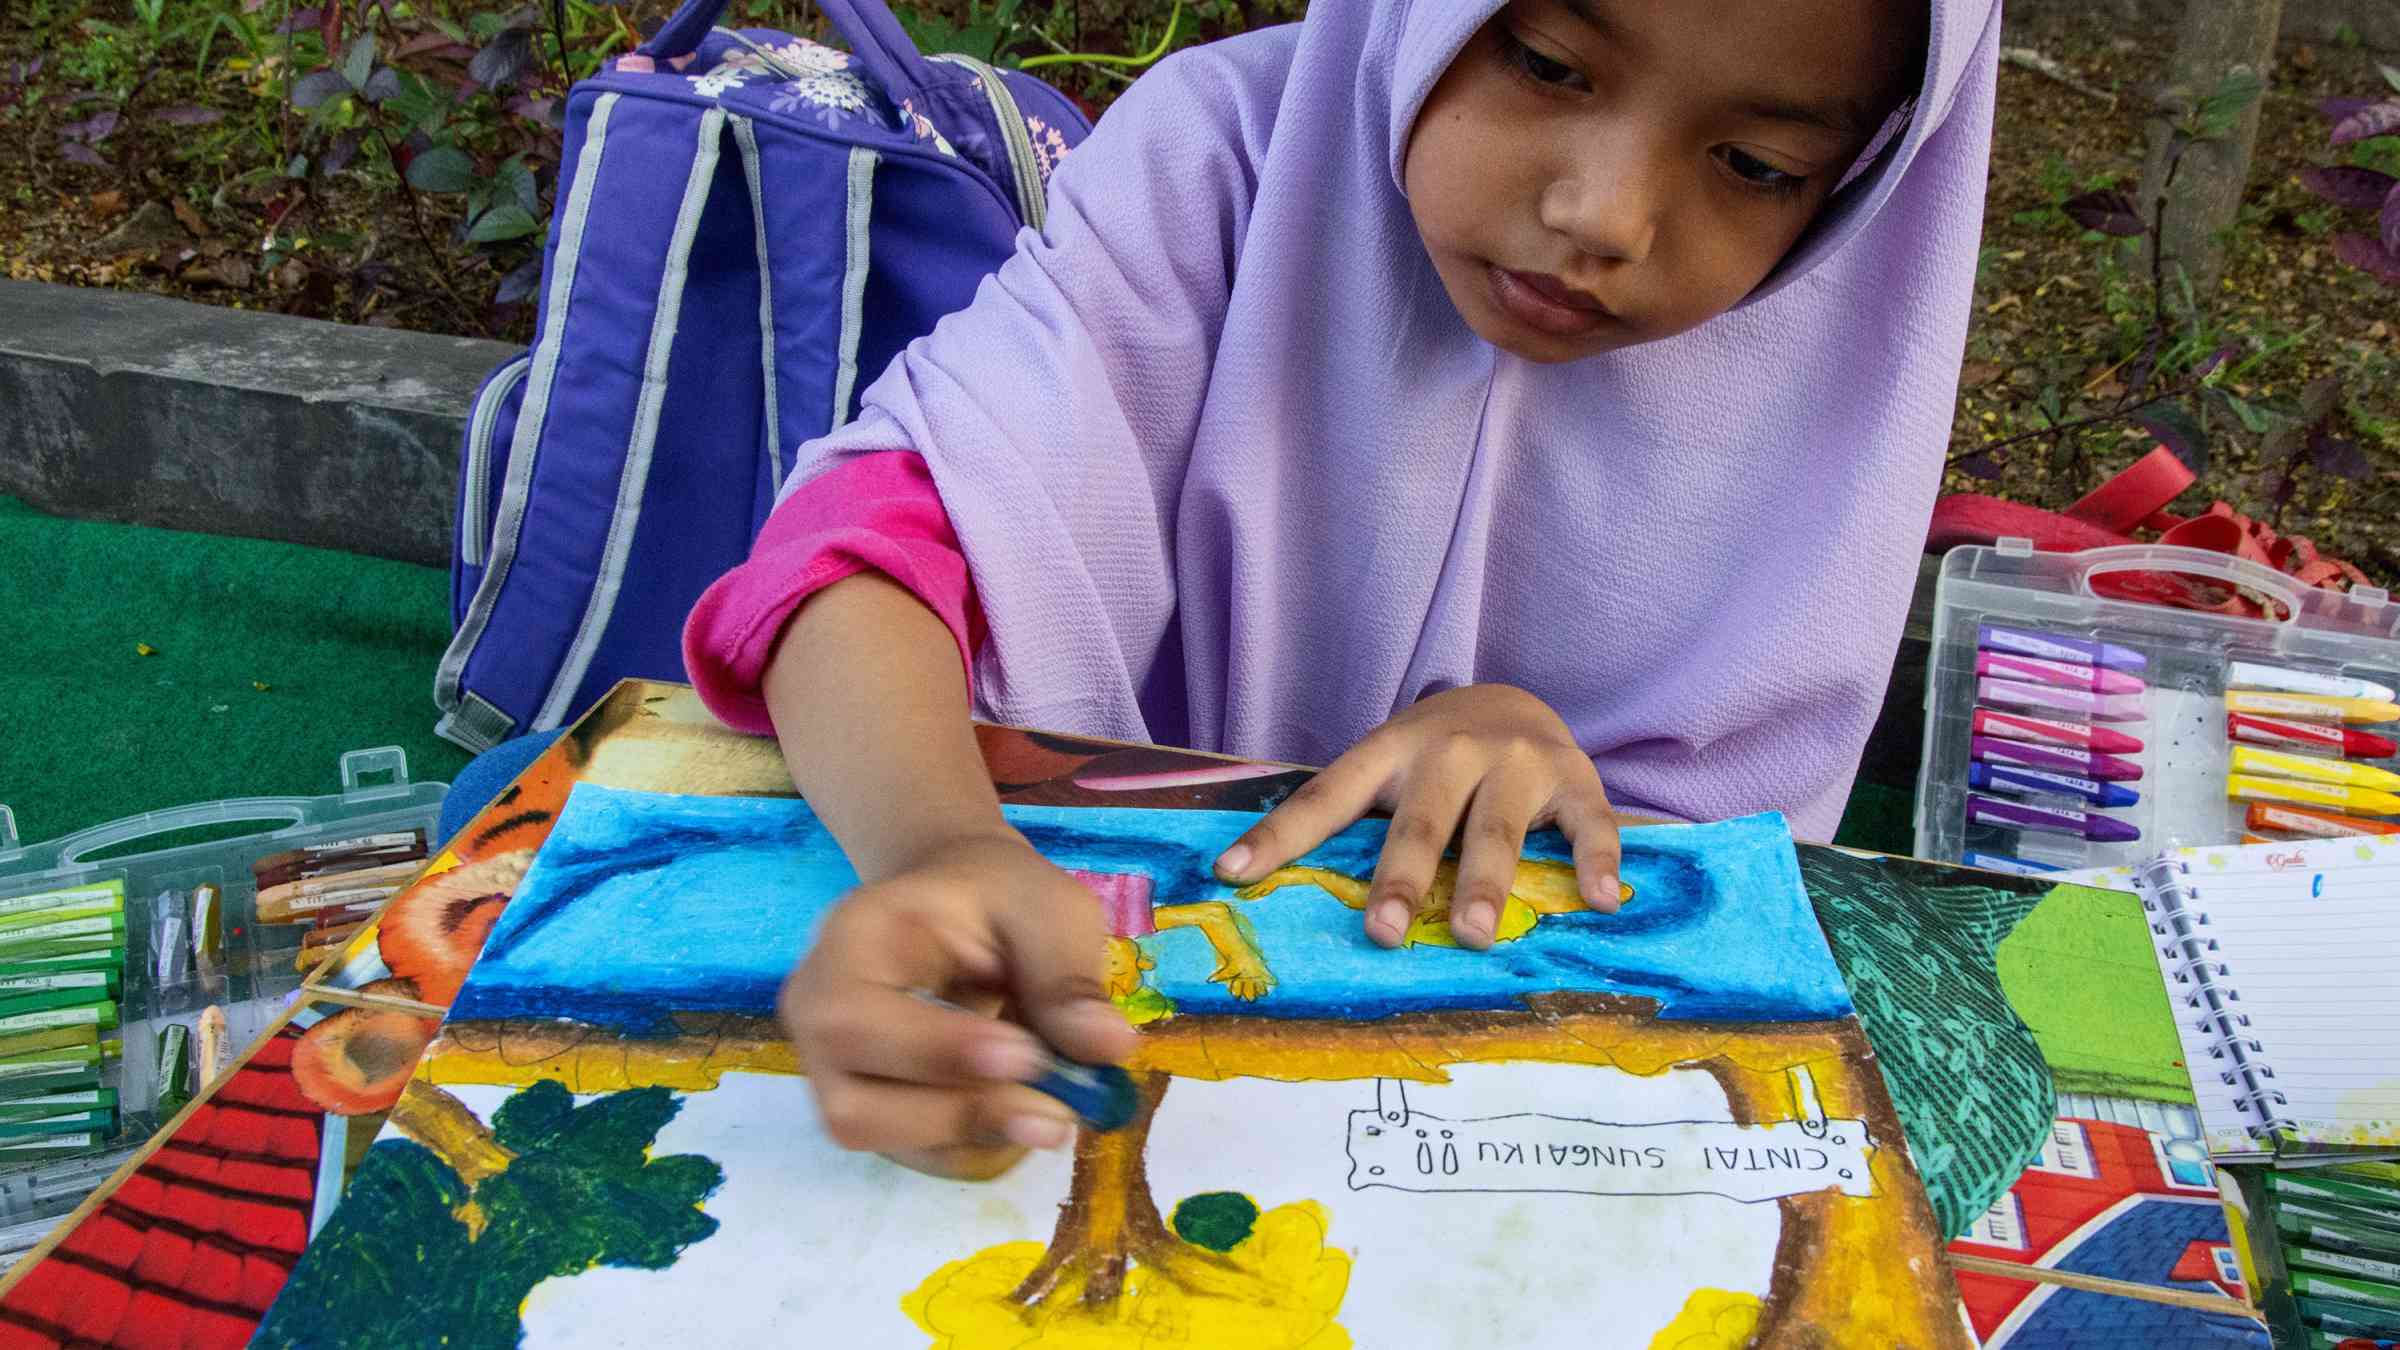 A girl completing a painting showing trees, people and a sign saying “Cinta Lingkungan”